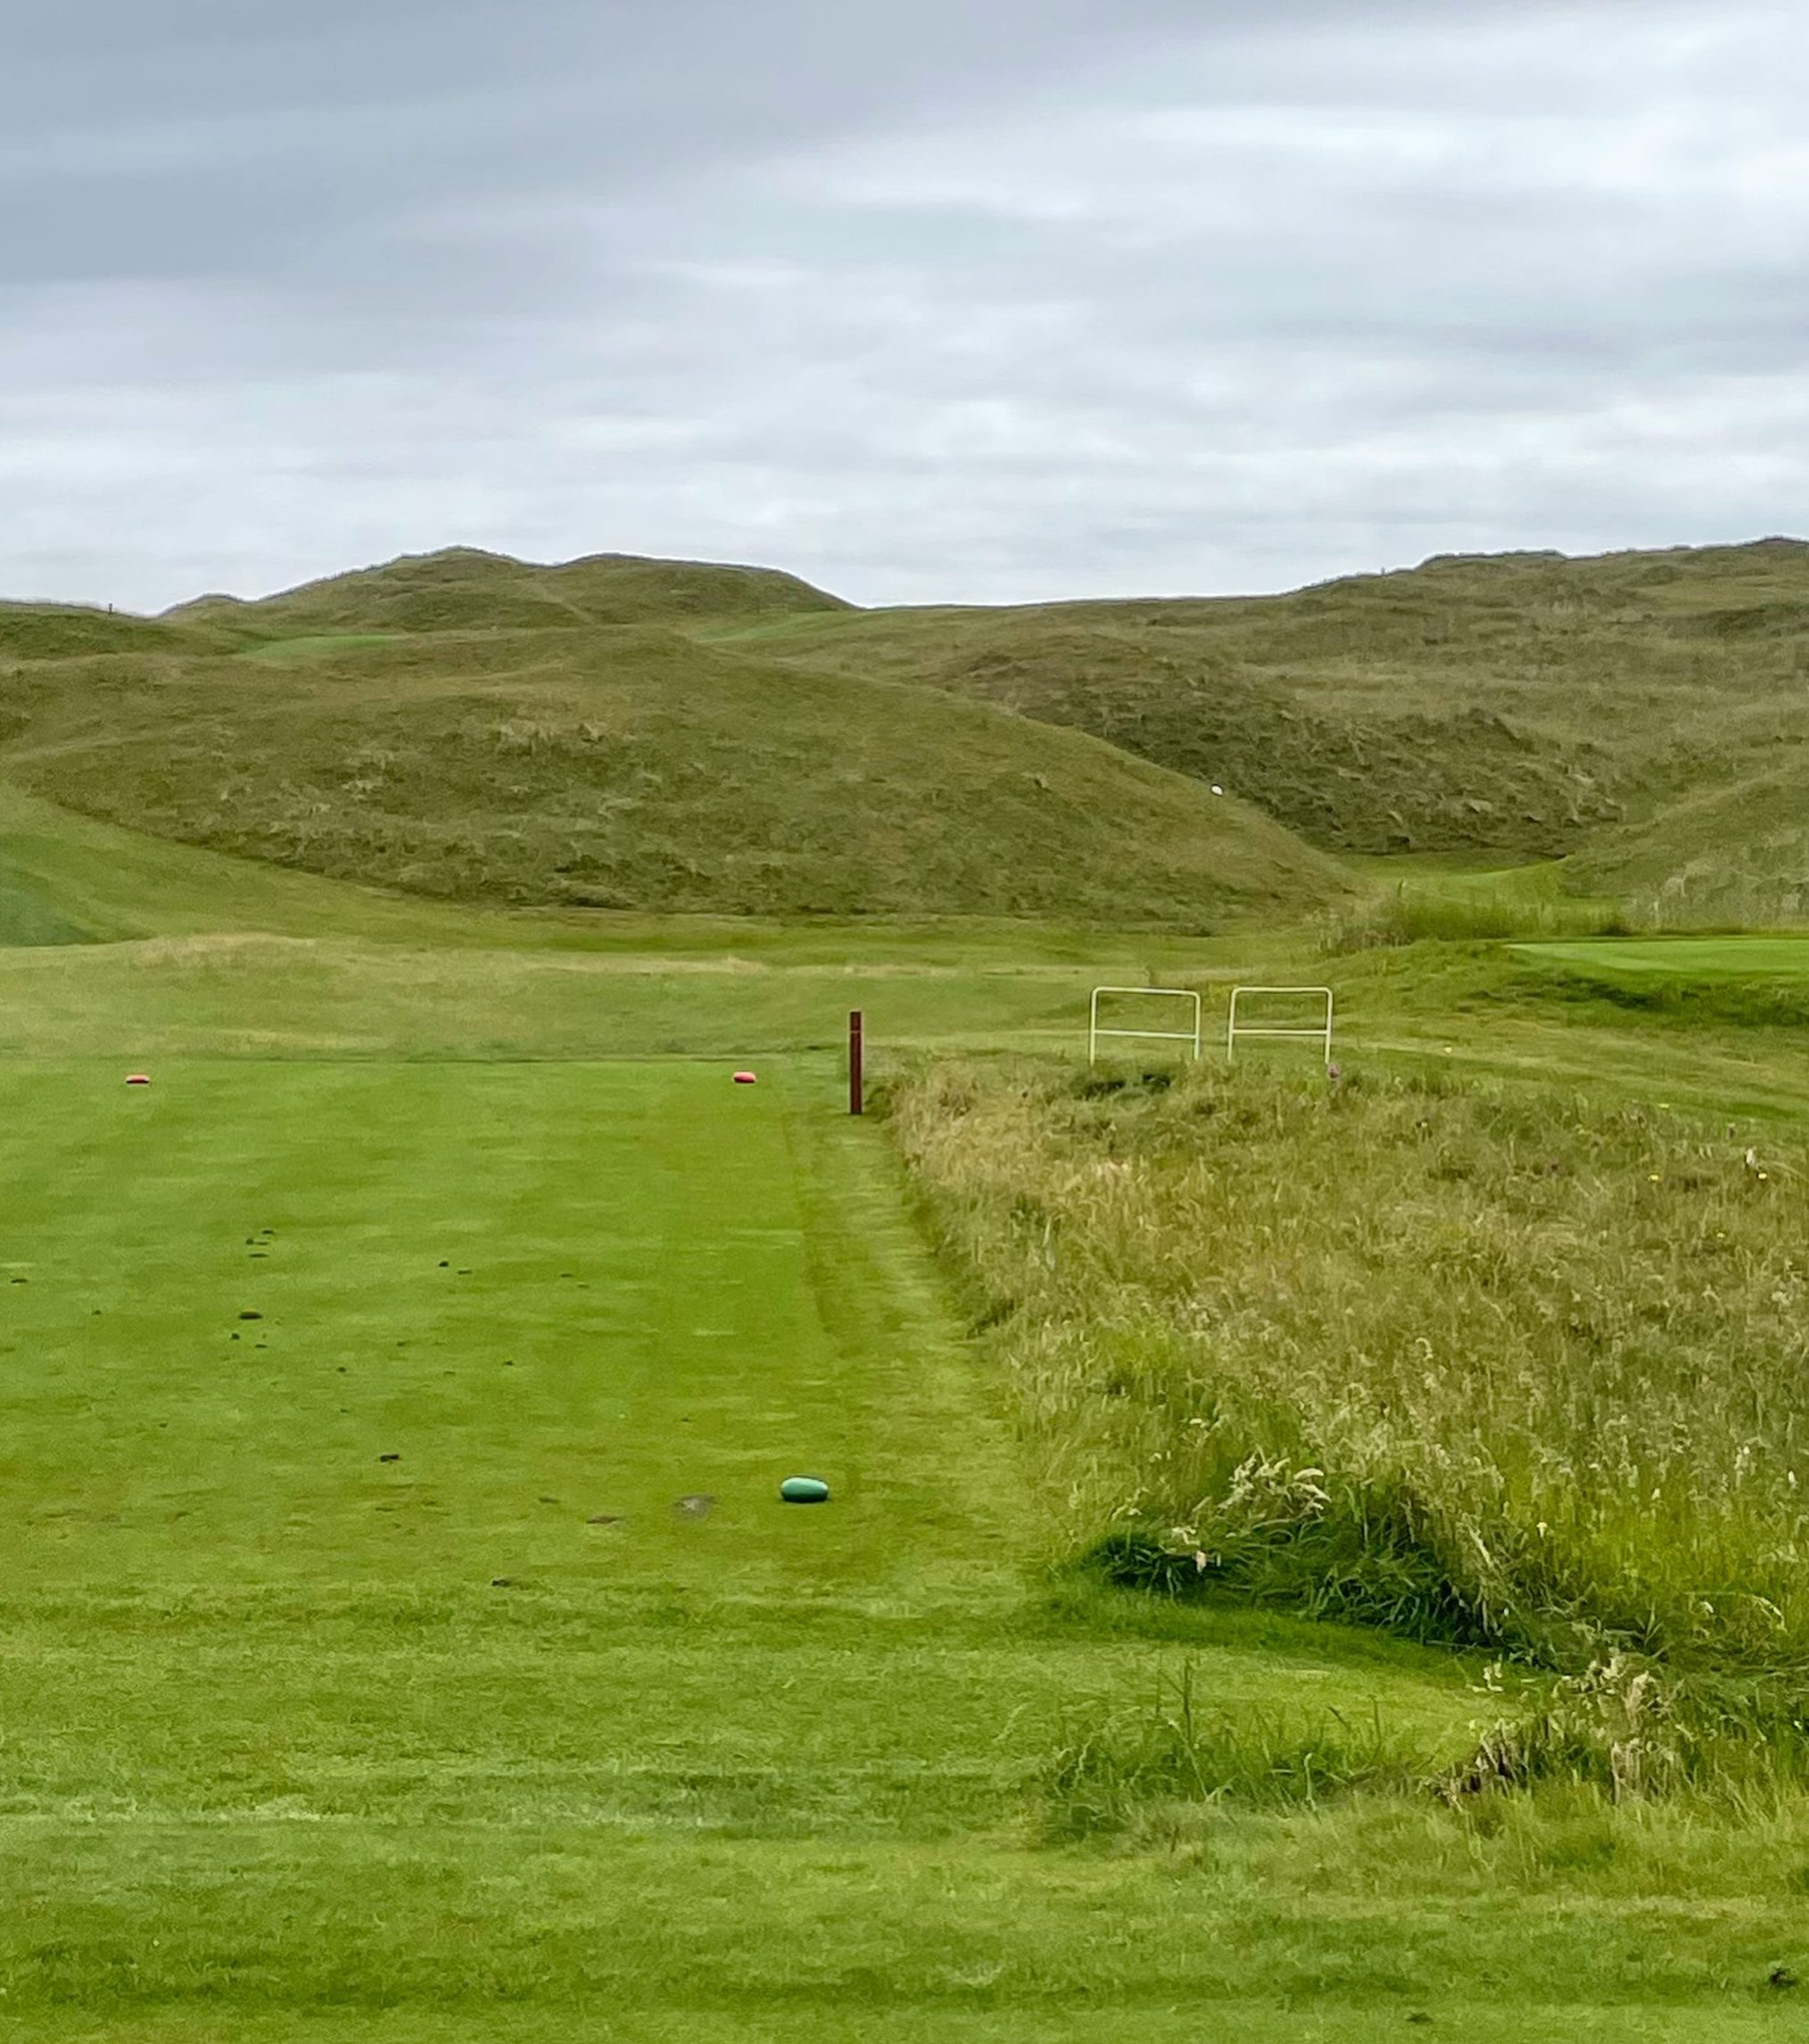 The Dell hole, a blind par 3 at at Lahinch Golf Club.